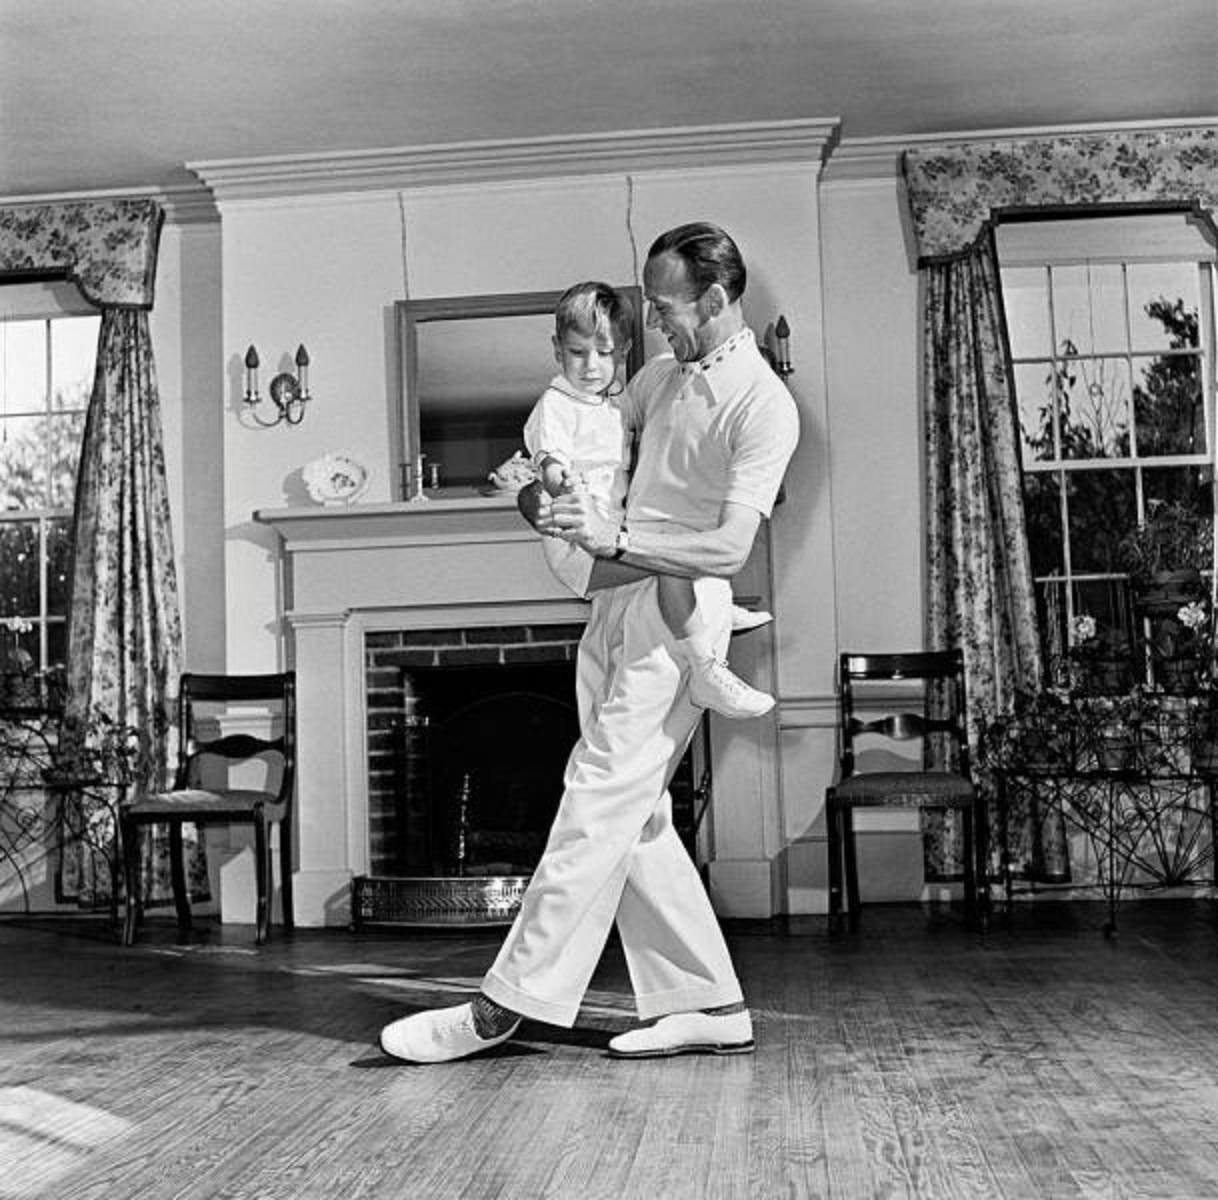 Fred Astaire dancing around the room with his young son